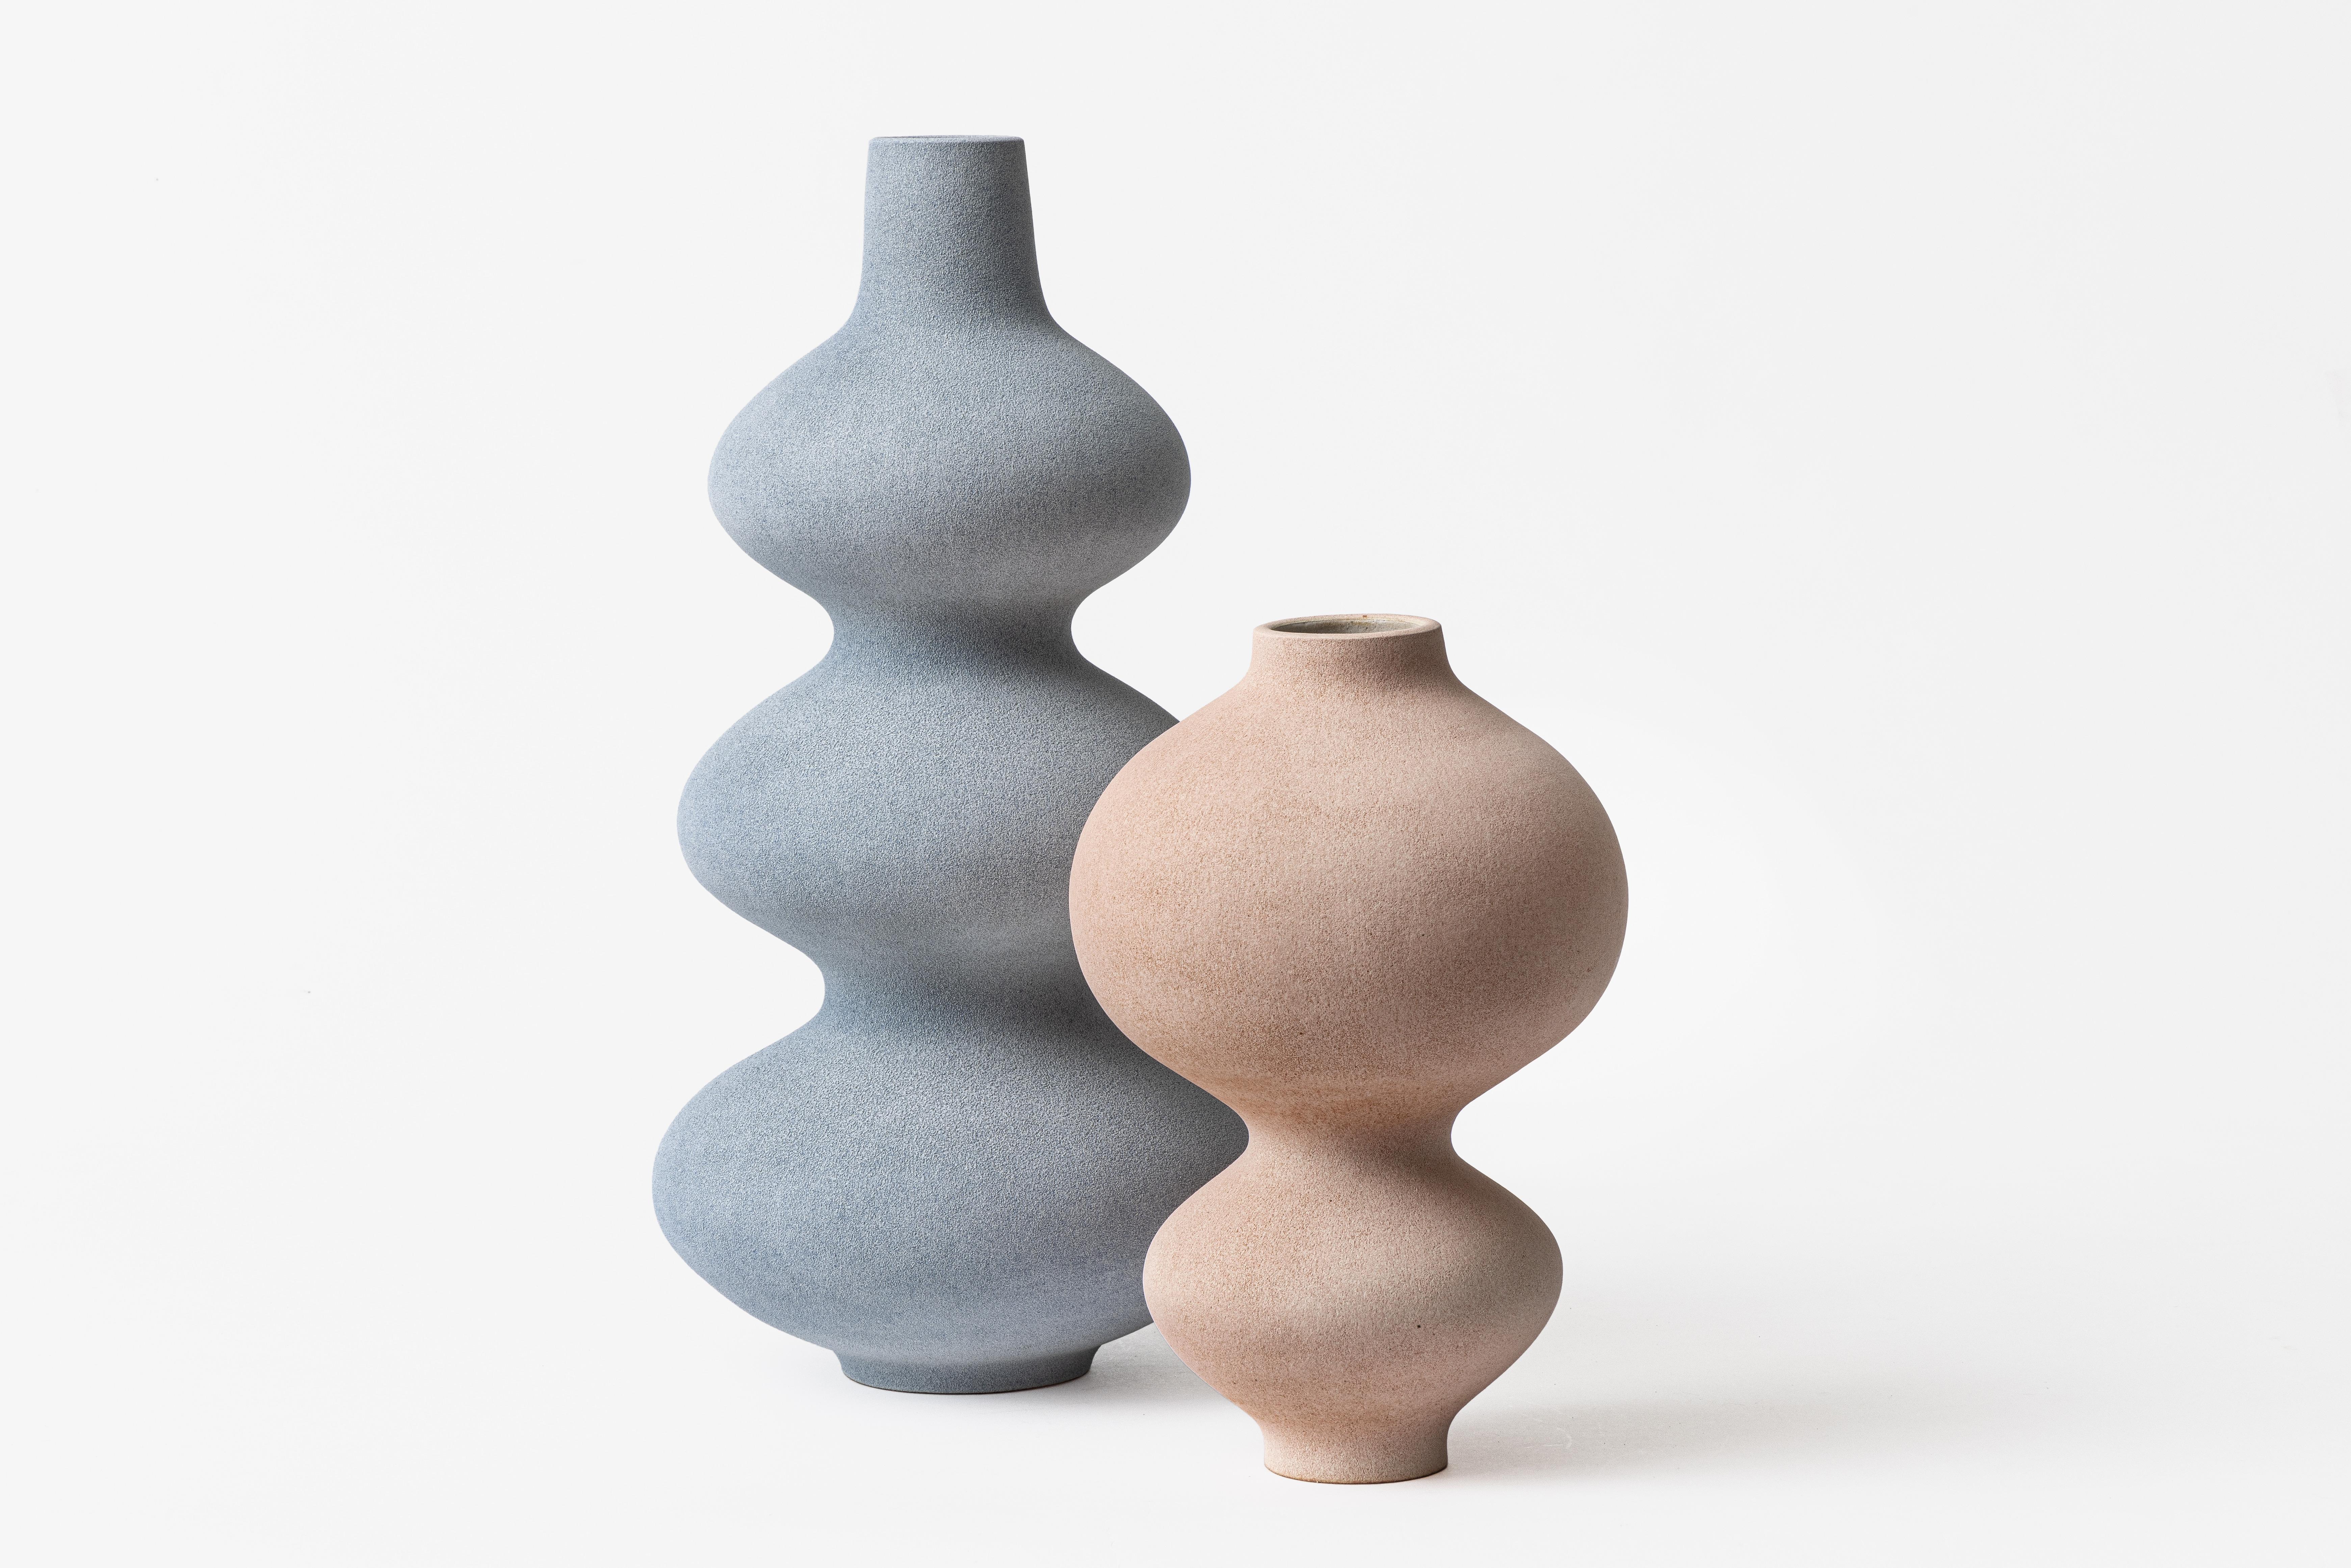 Baluster Vase IV, 2023, (Ceramic, C. 11.4 in. h x 7.1 in. w x 7.1 in. d, Object No.: 4151)

Heisselberg Pedersen’s sculptures are hand-modeled from stoneware and glazed with slip-glazes, which give the works a stone-like, dry surface with a rich